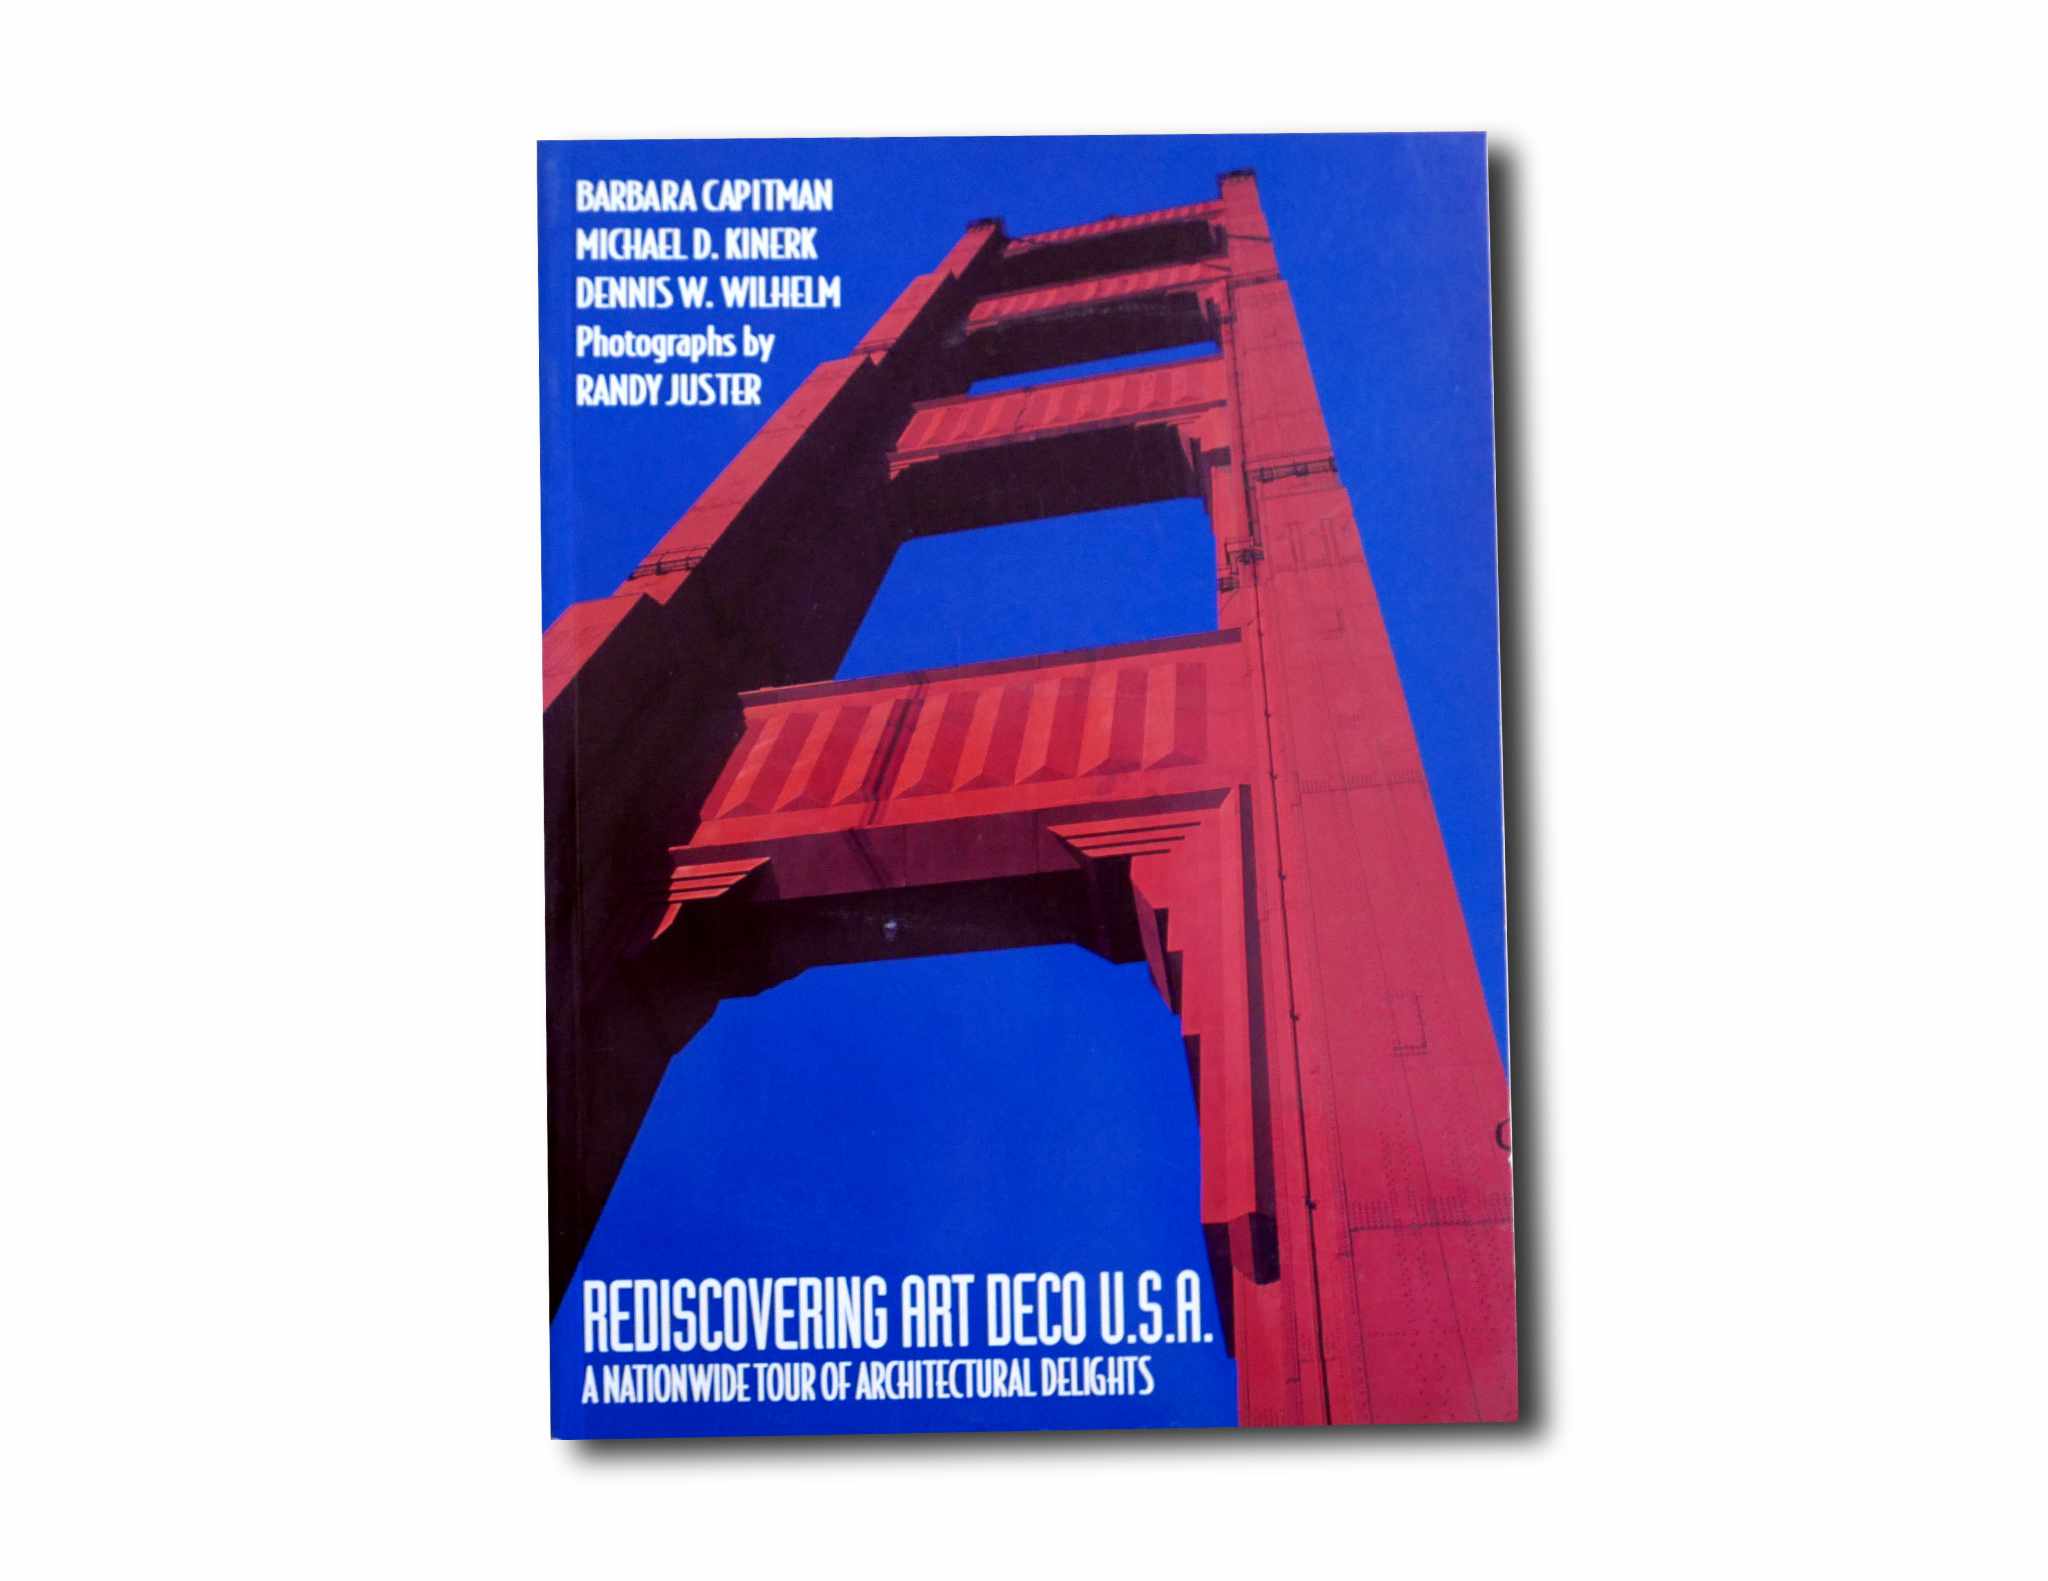 Image showing the book Rediscovering Art Deco USA